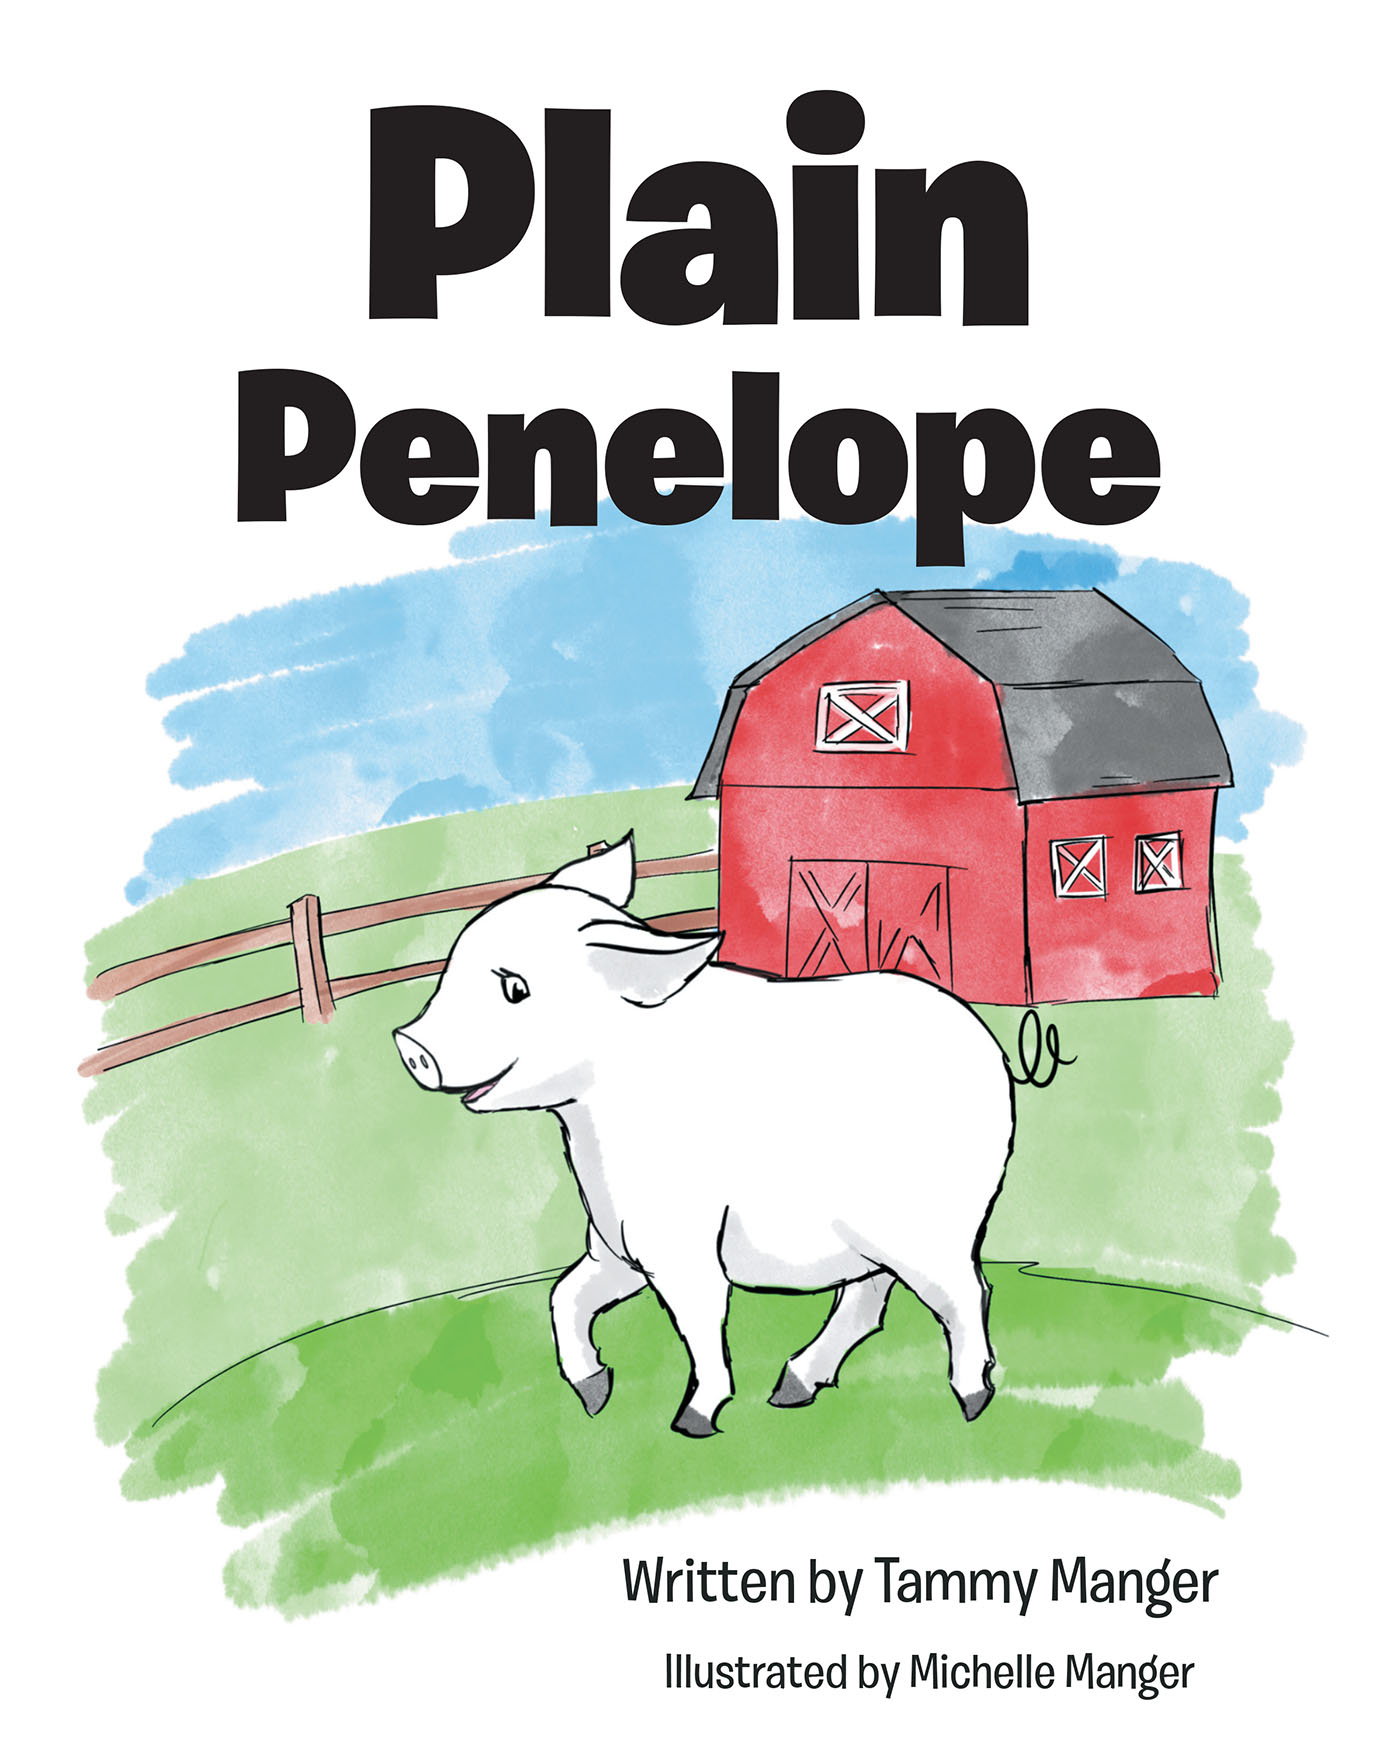 Tammy Manger’s Newly Released "Plain Penelope" is a Heartwarming Narrative That Showcases That True Beauty Comes from How We Treat Others